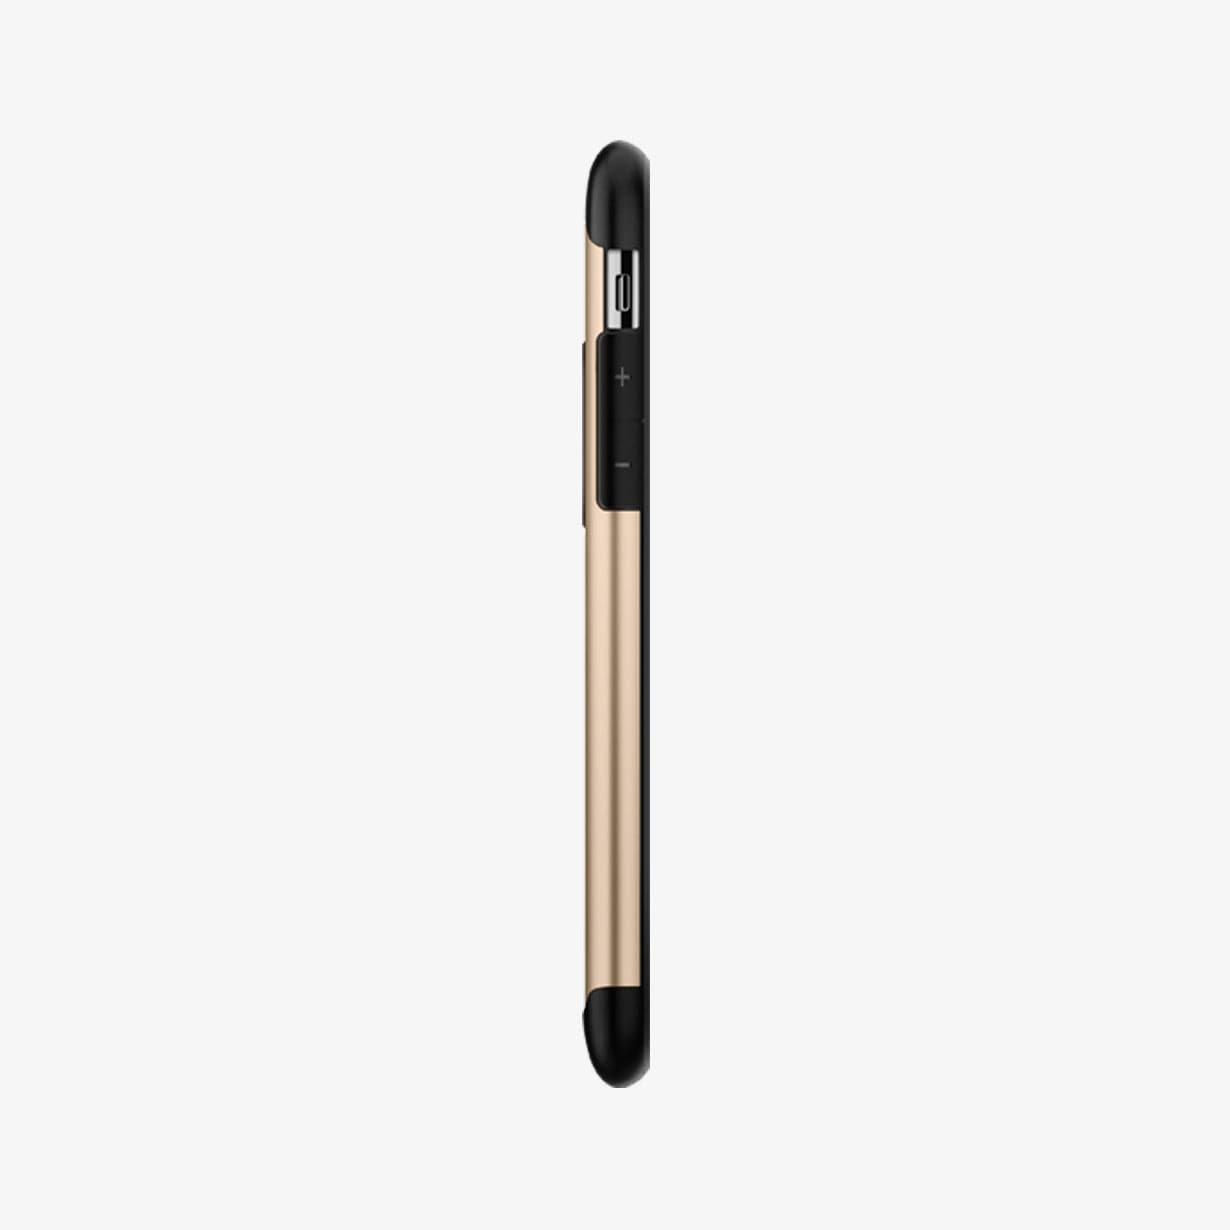 063CS24516 - iPhone XS Case Slim Armor in champagne gold showing the side with volume controls